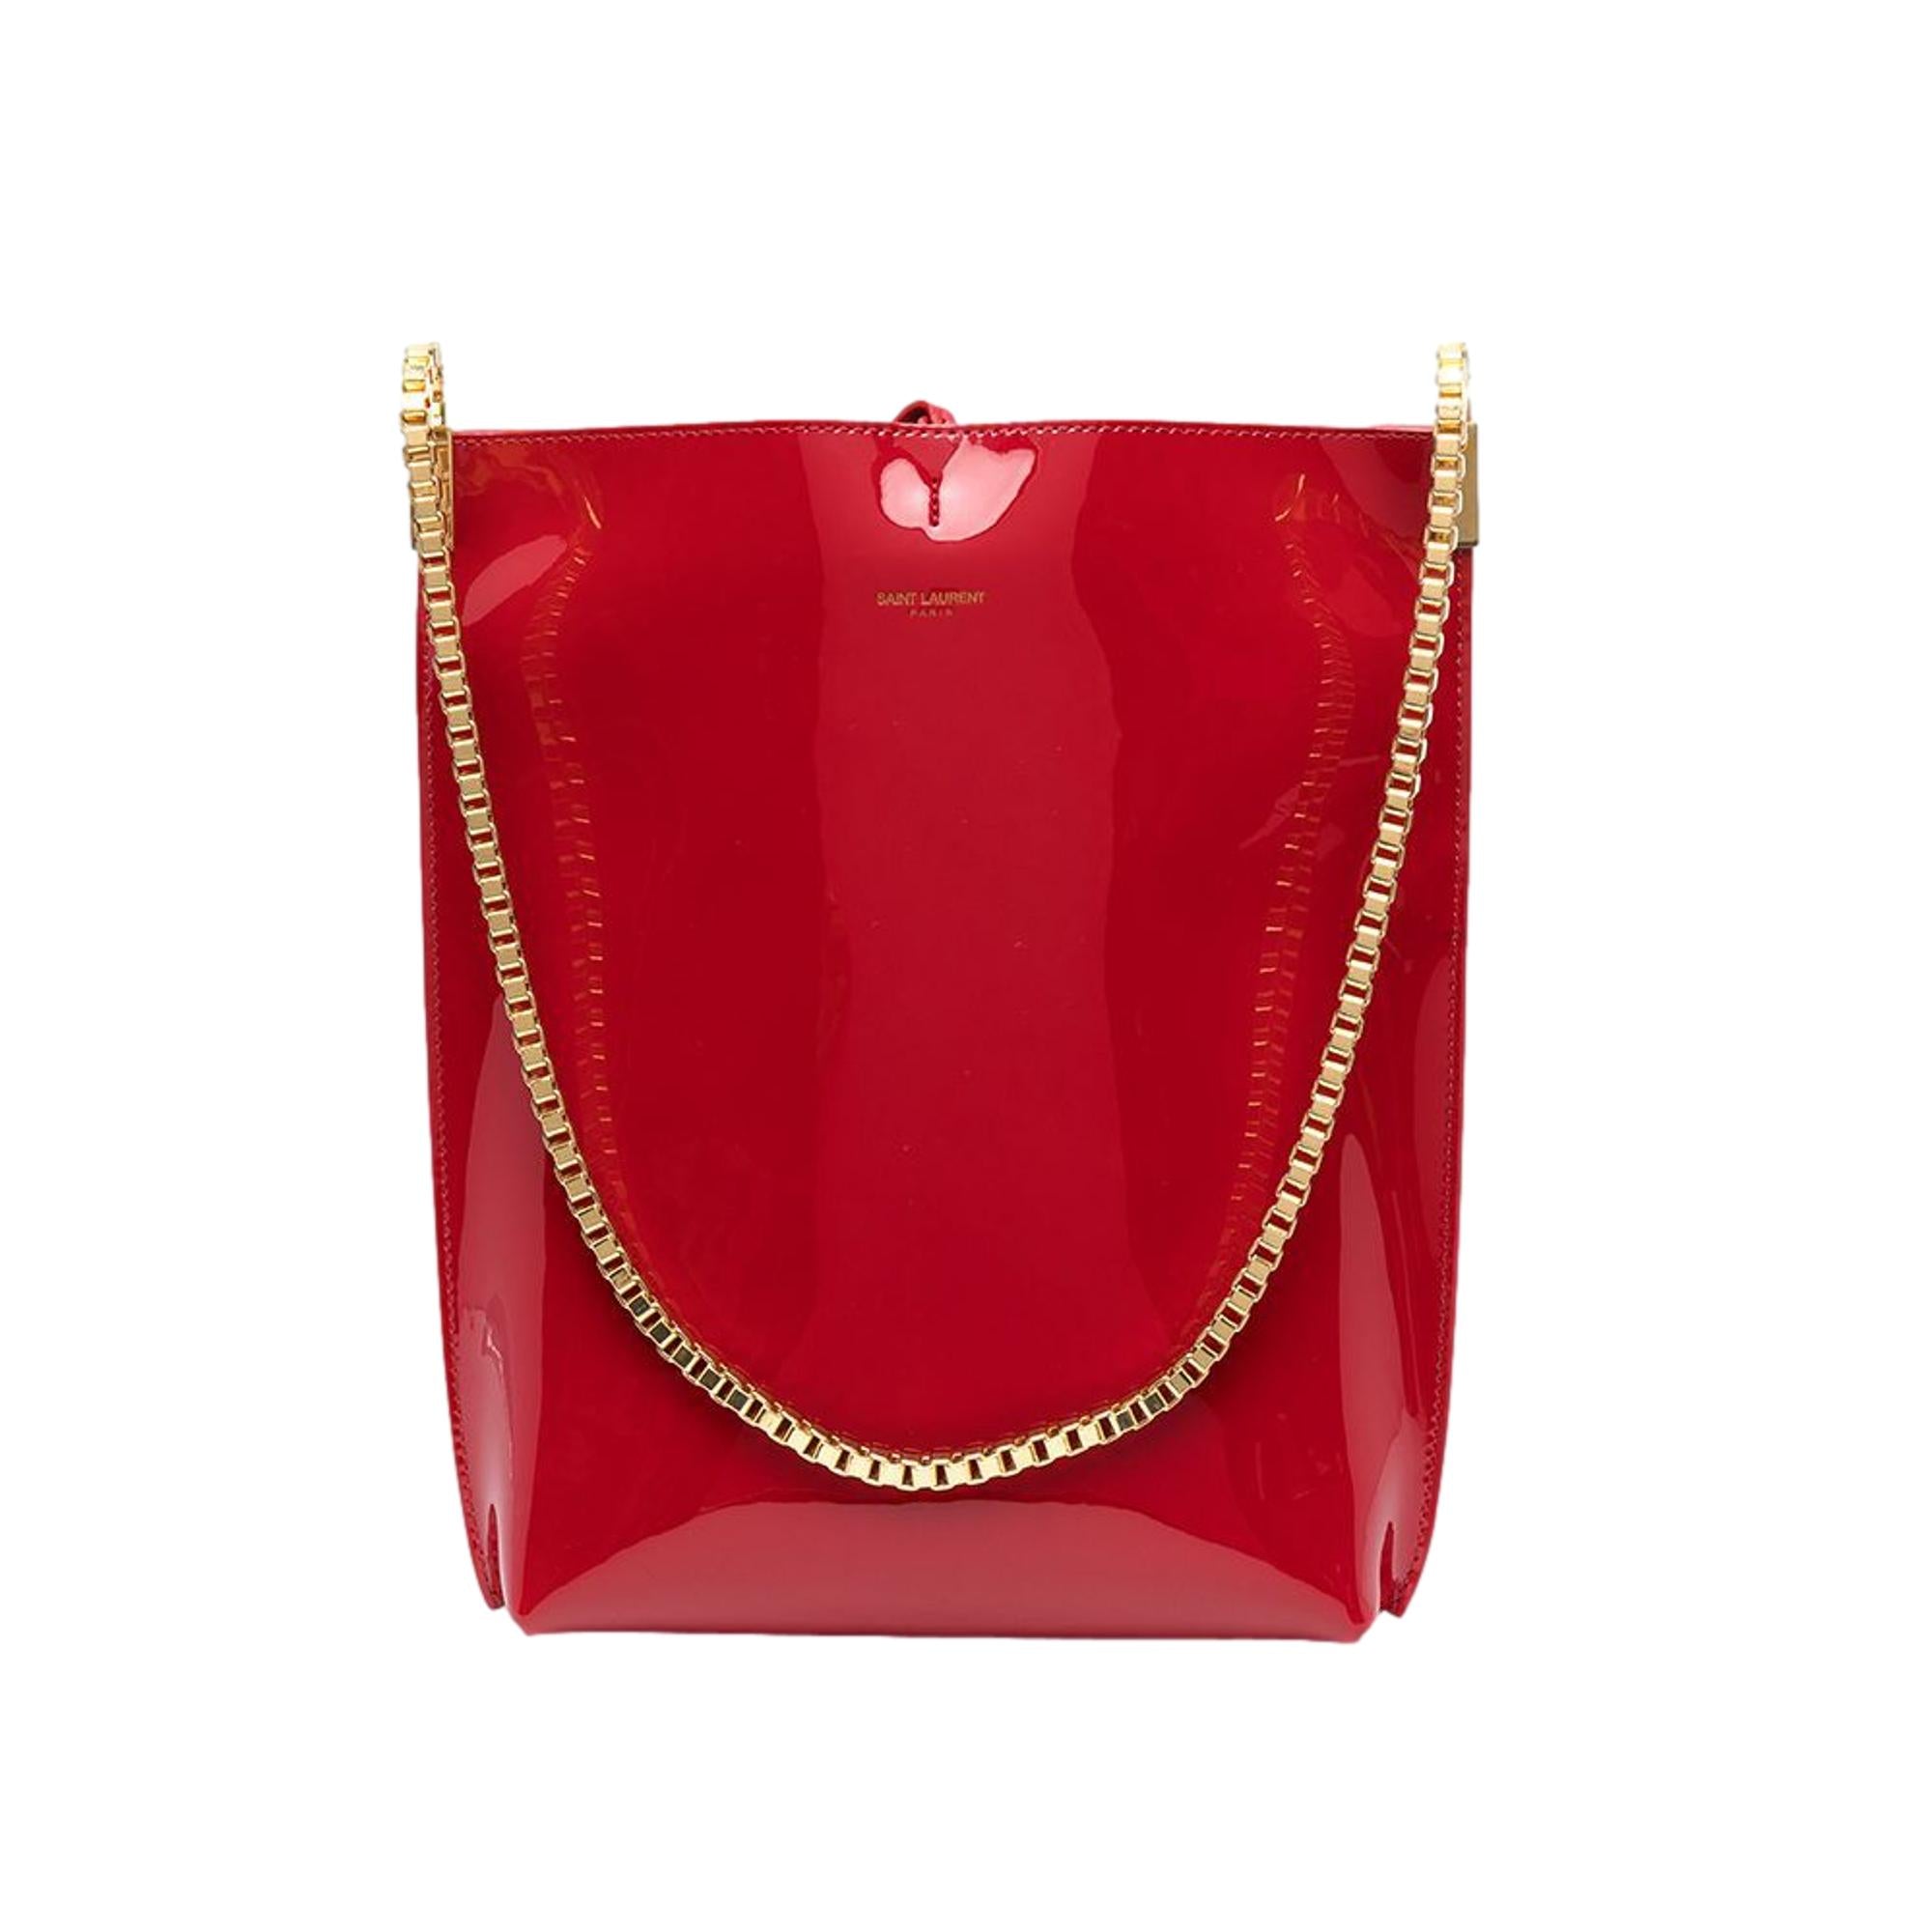 Saint Laurent Suzanne Red Patent Leather Small Chain Hobo Bag